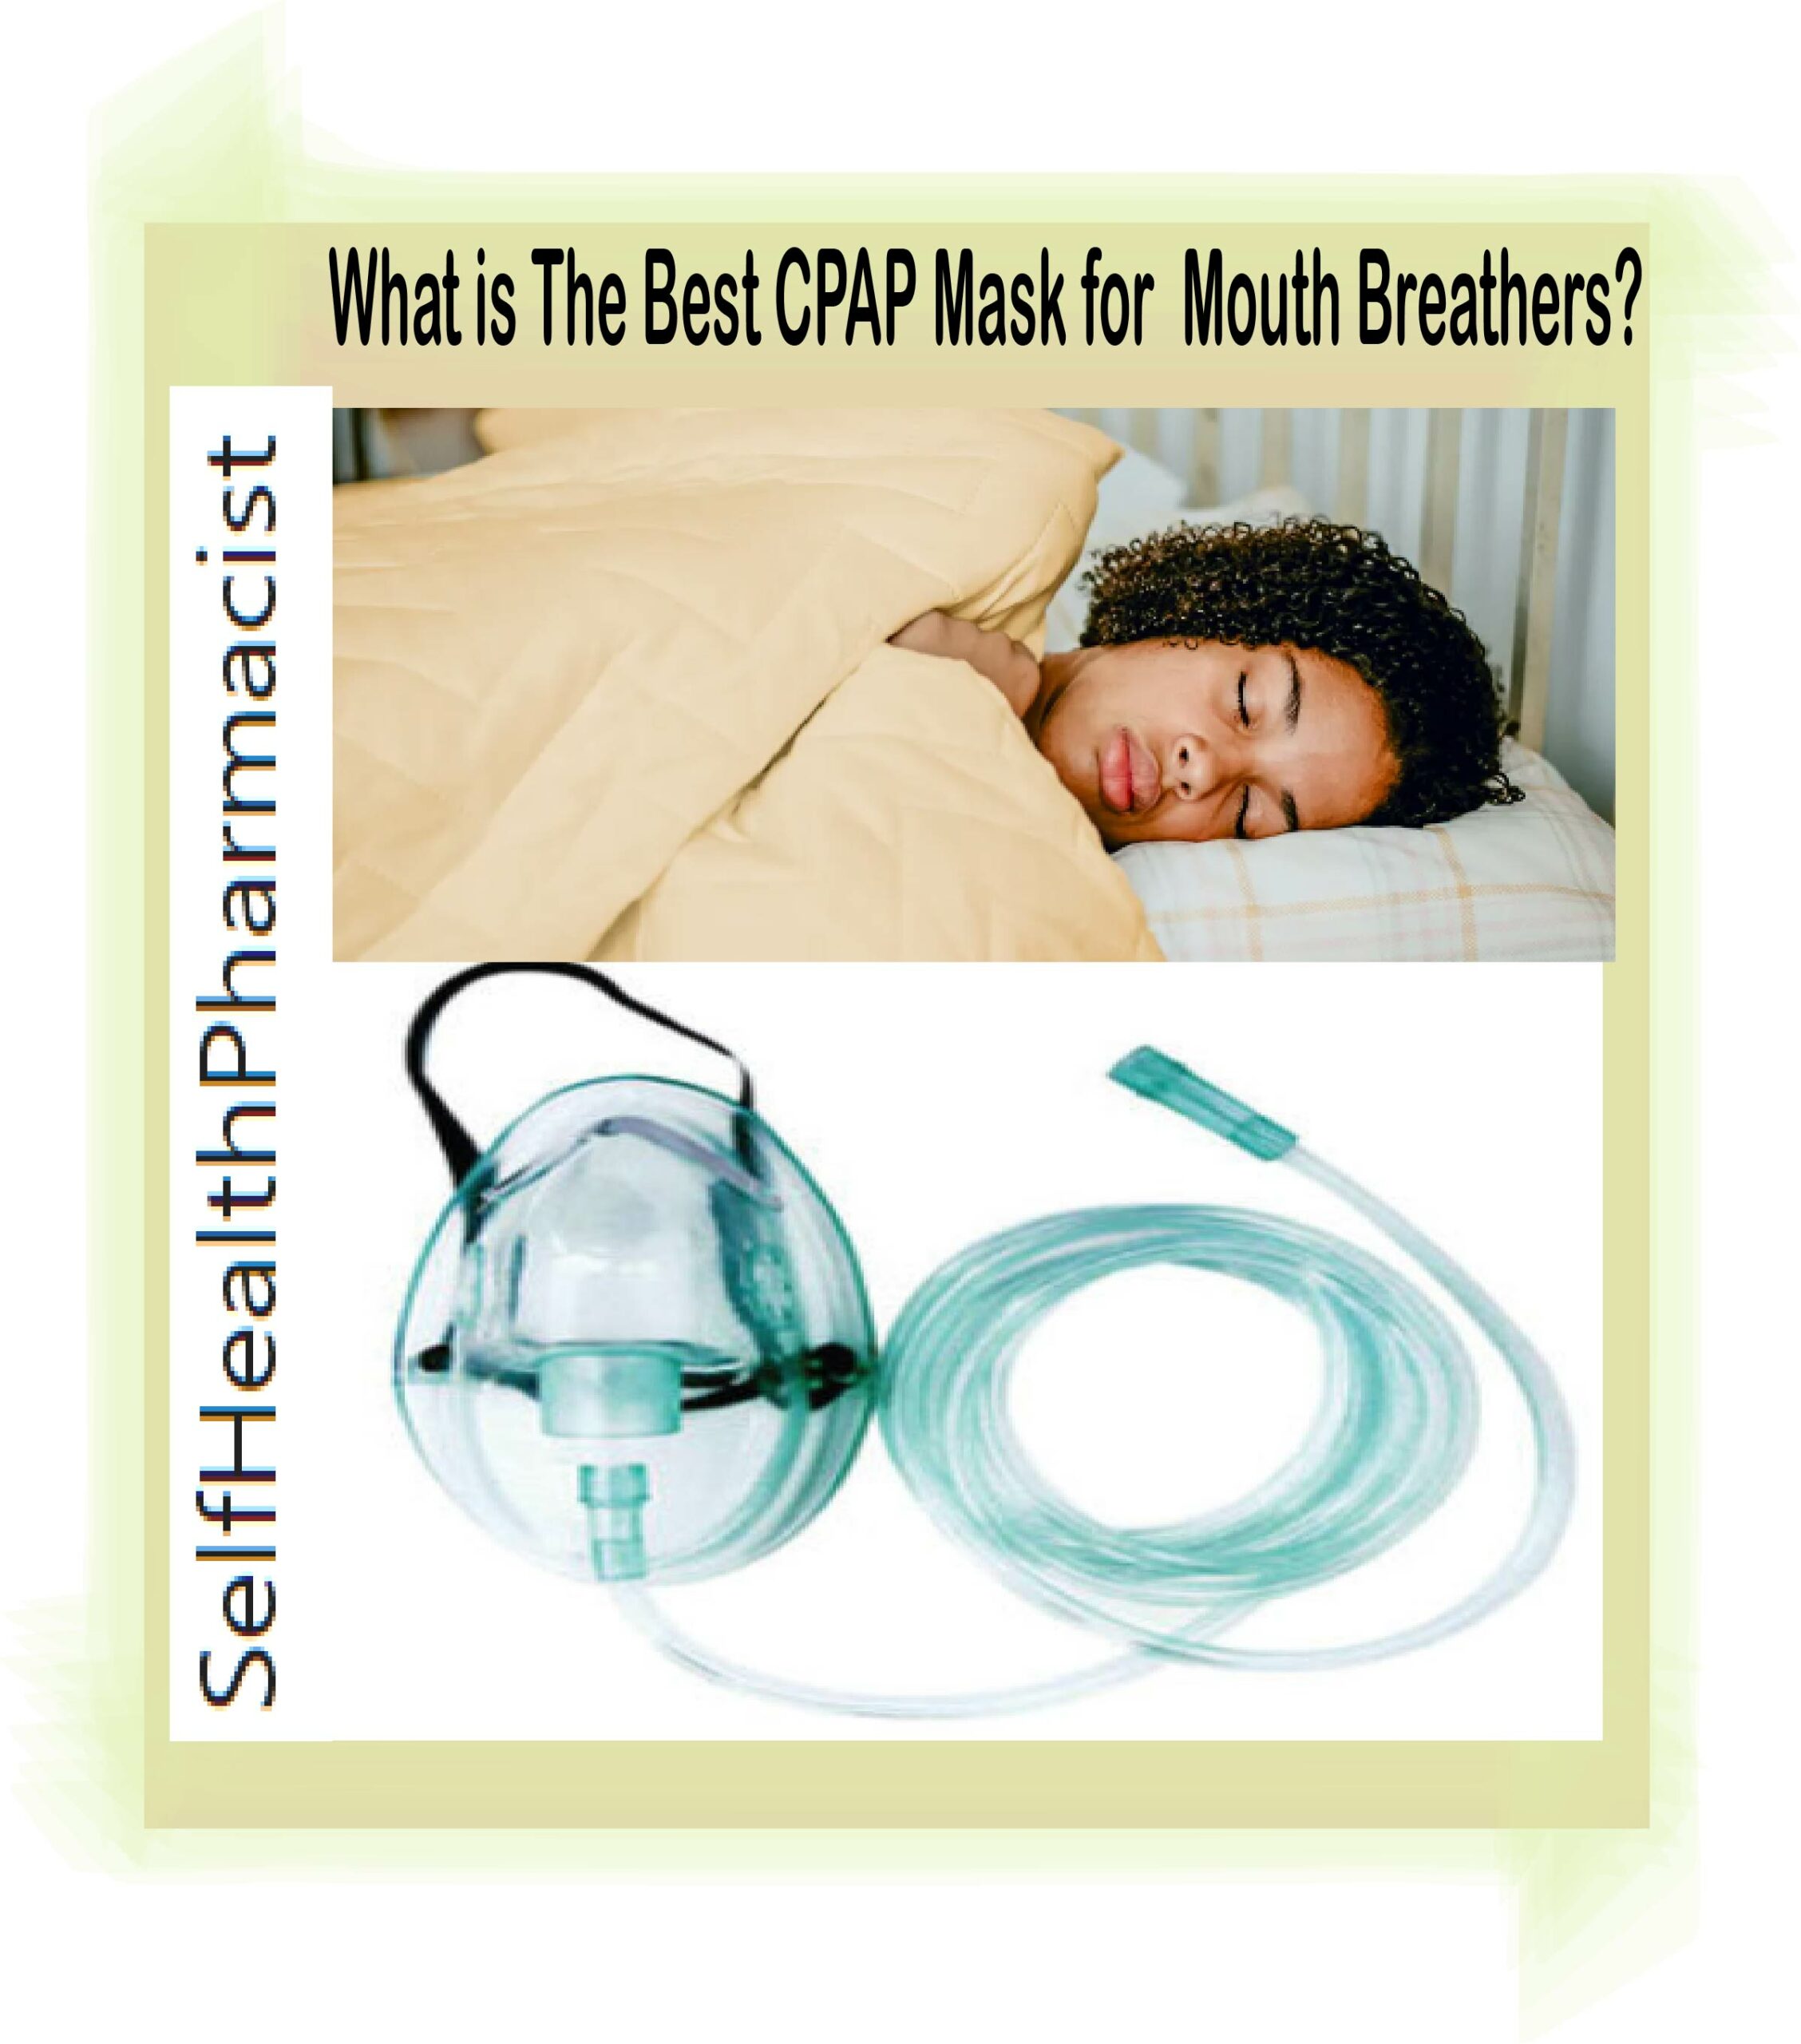 What Kind of CPAP Mask is Best for Mouth Breathers?